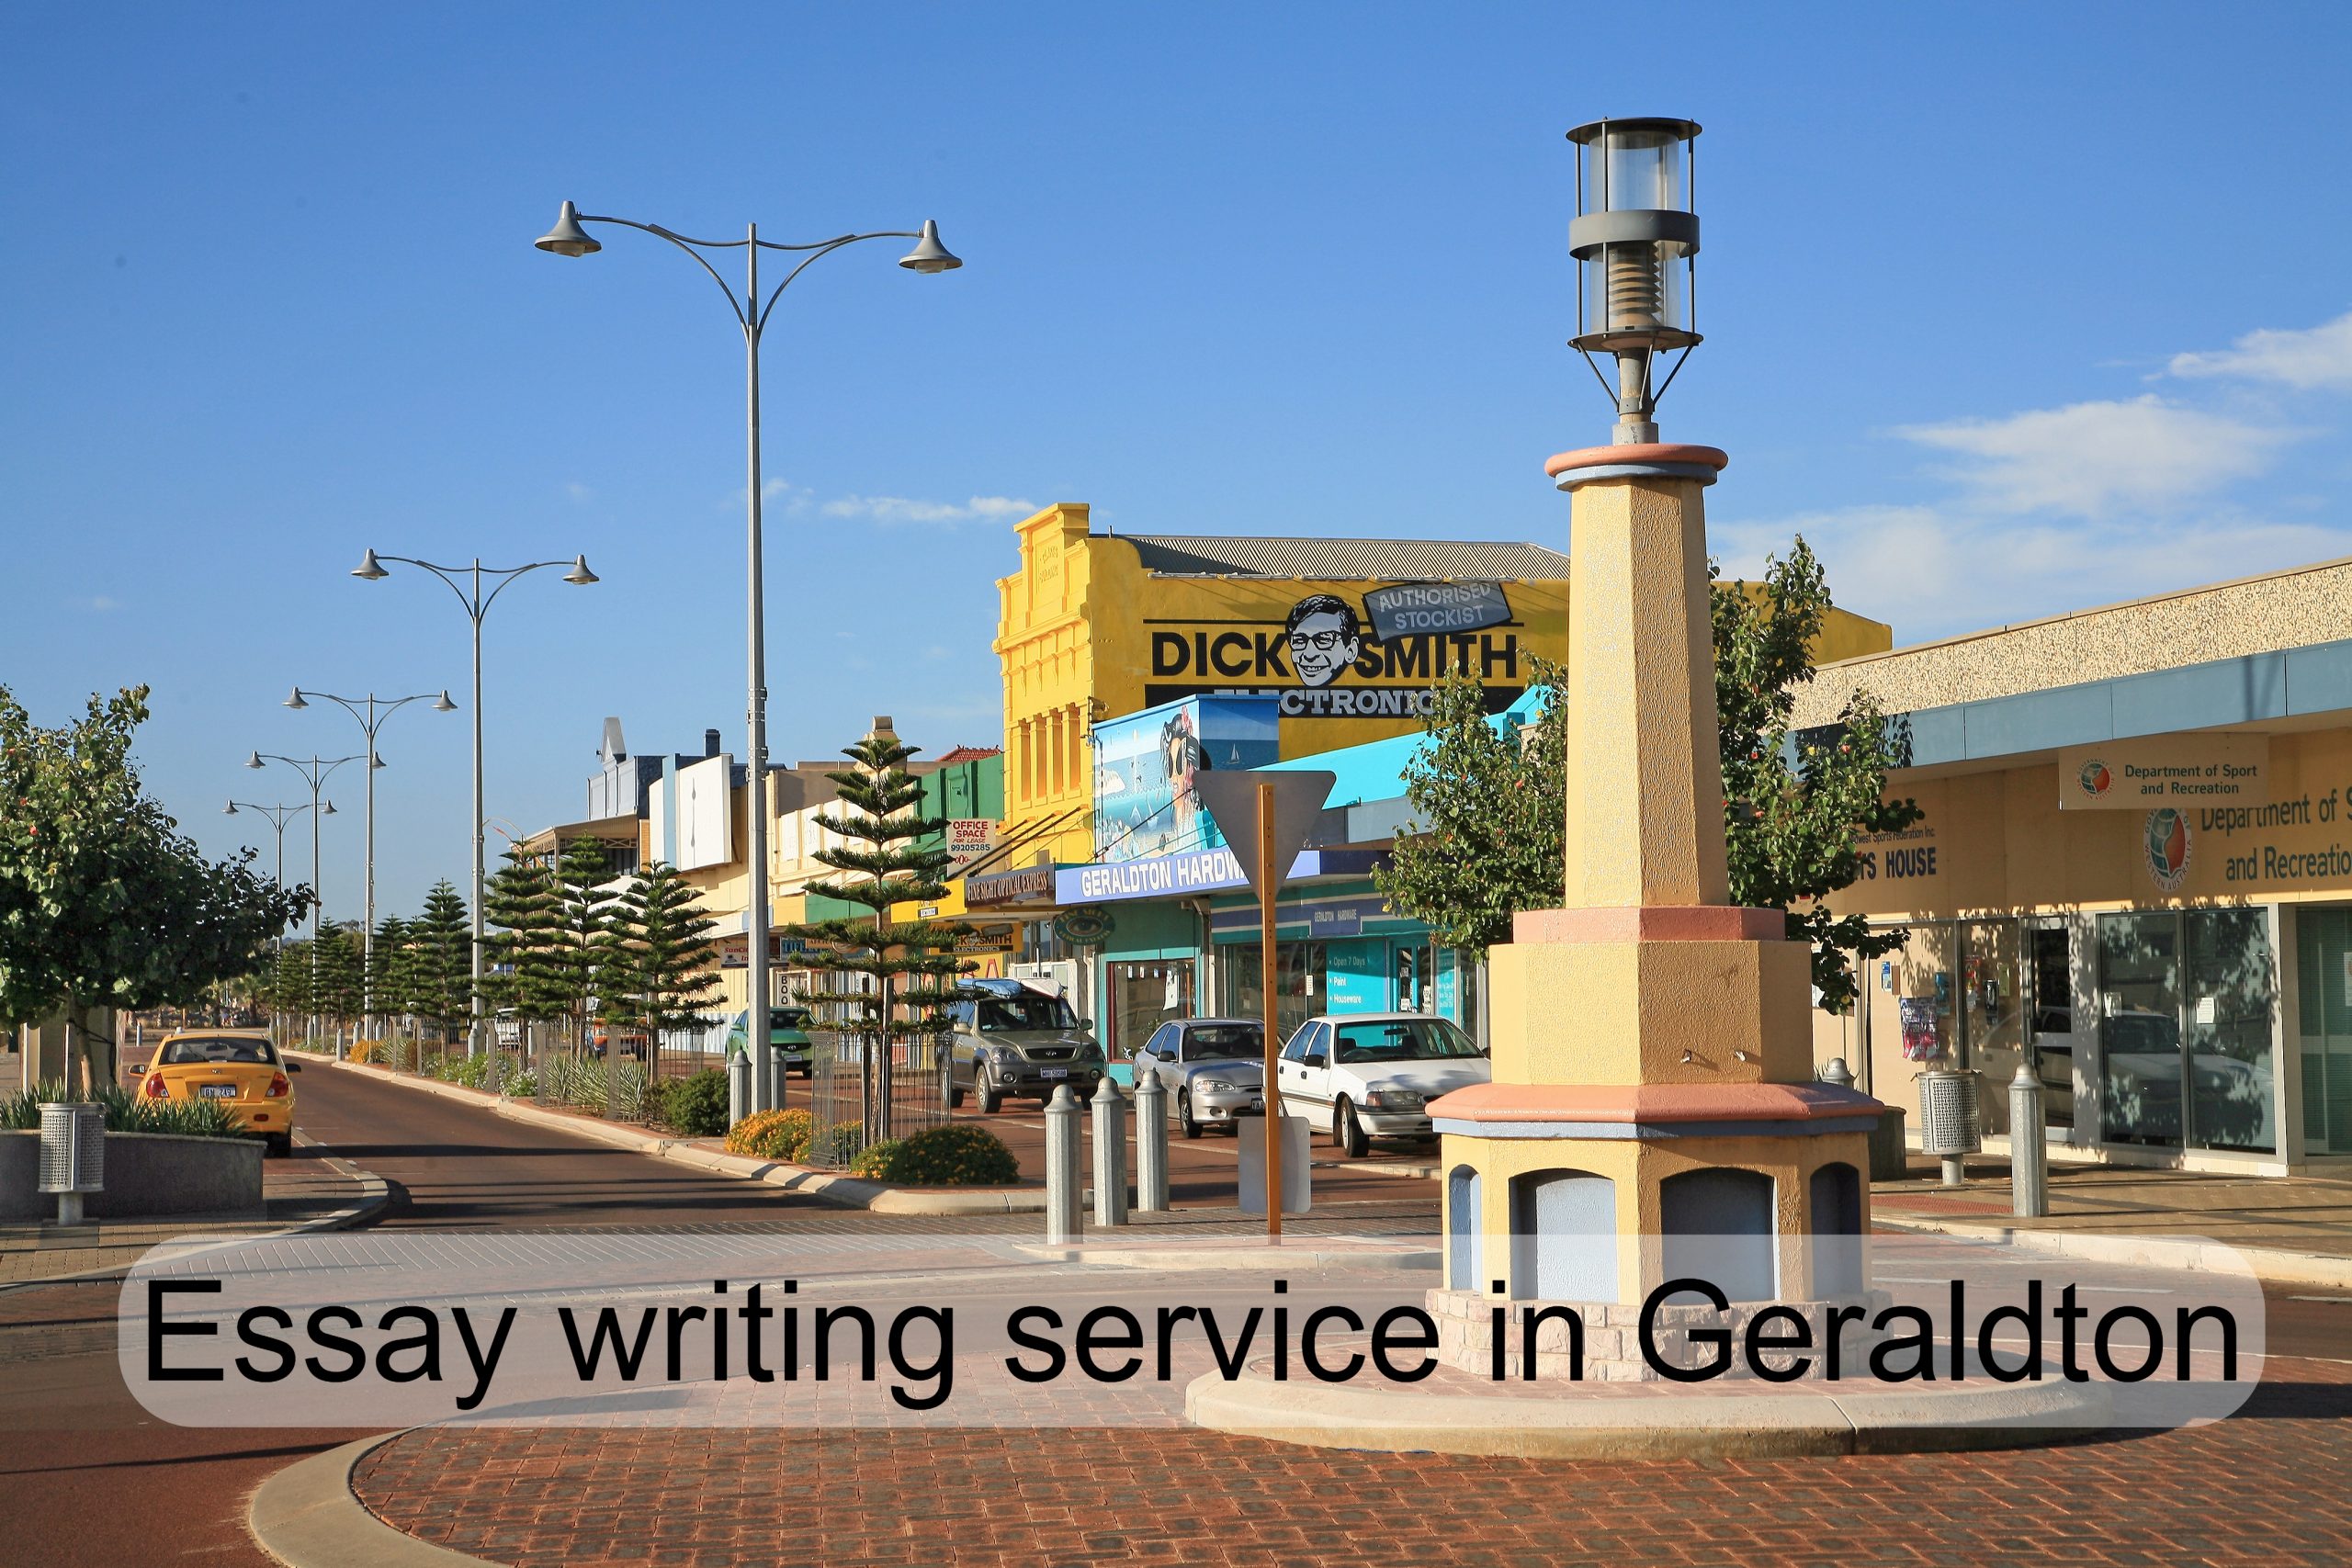 Essay writing service in Geraldton